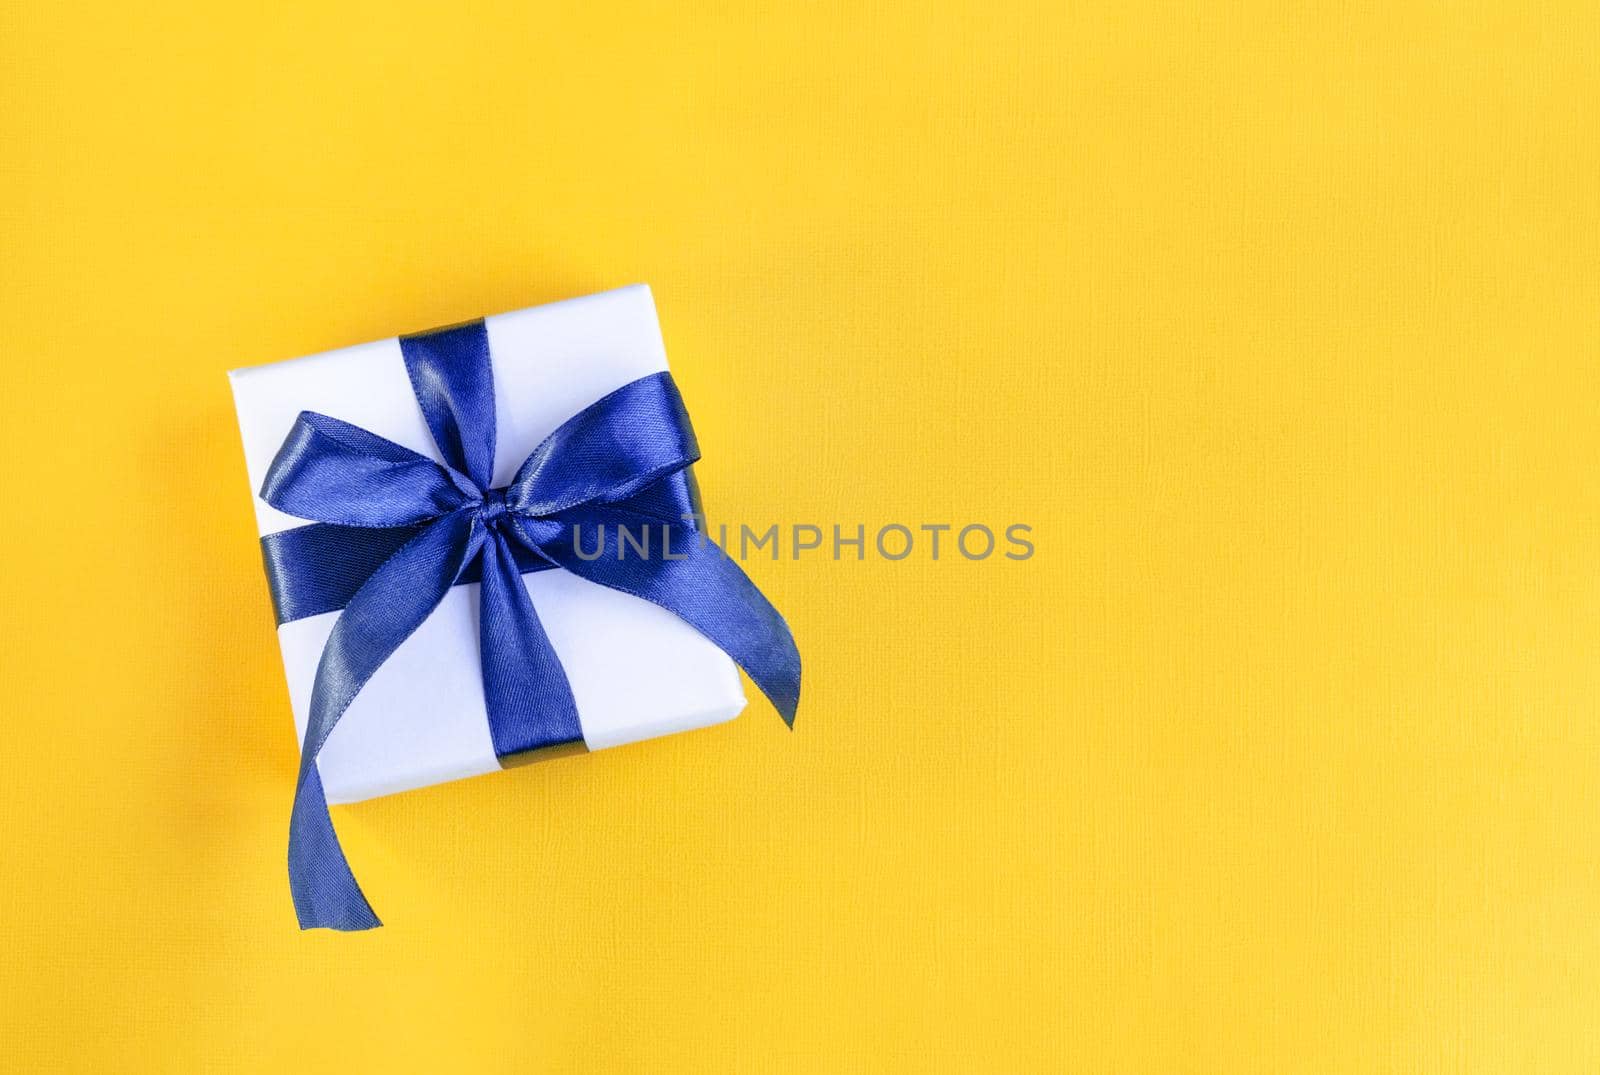 Banner of a Gift wrapped in white paper with a blue bow made of satin on festive yellow orange background by lavsketch